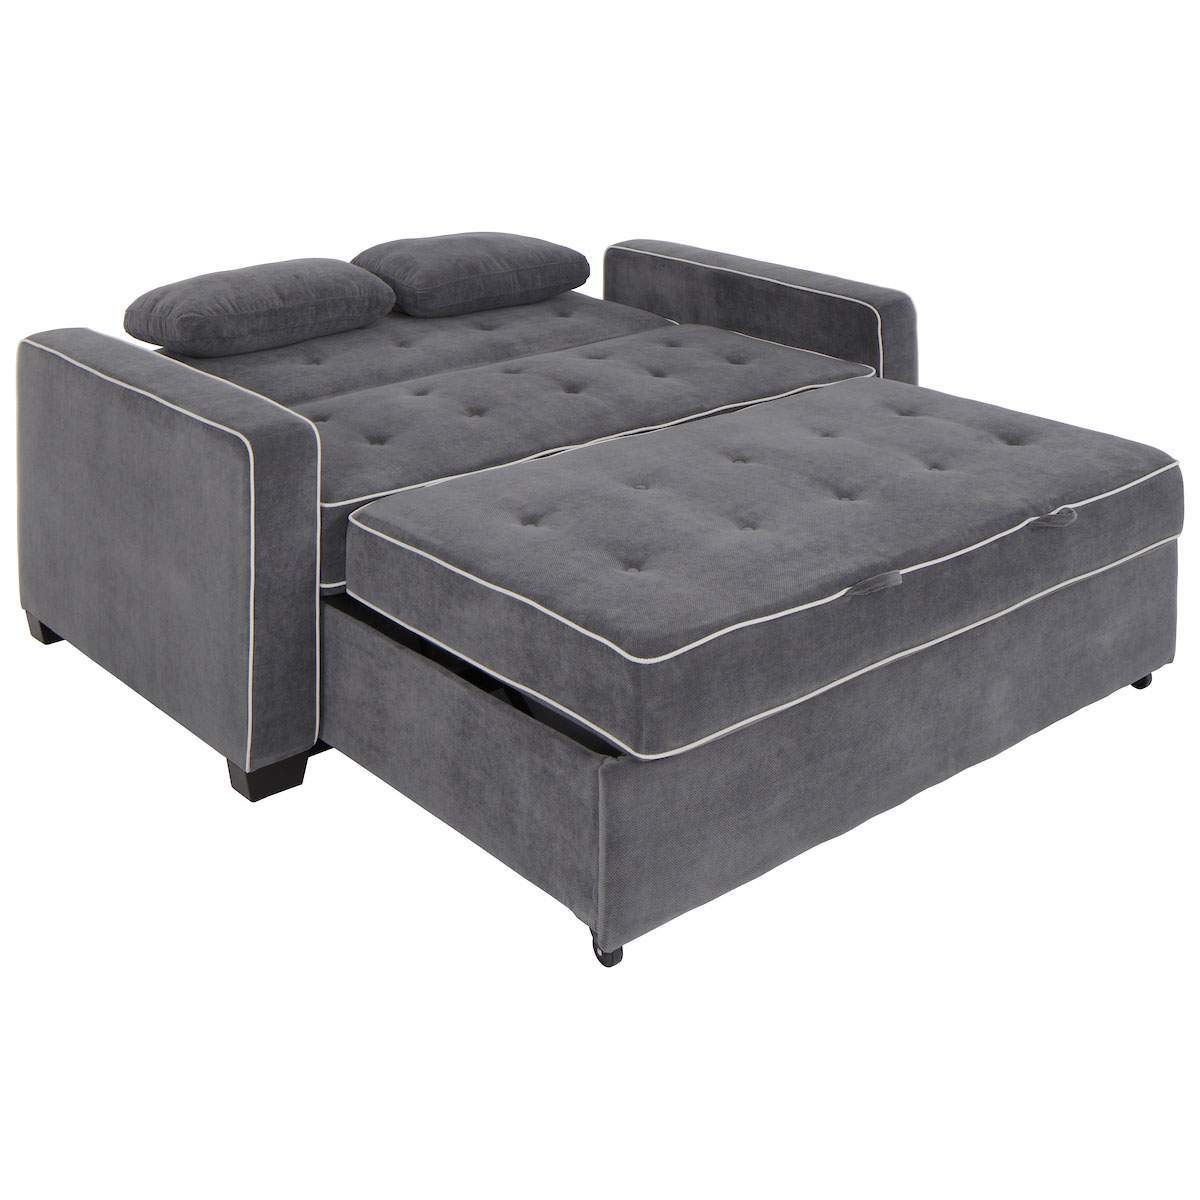 Supreme Pull Out Sofa Bed Fold Away Couch In 2 In 1 Gray Pull Out Sofa Beds (Gallery 10 of 20)